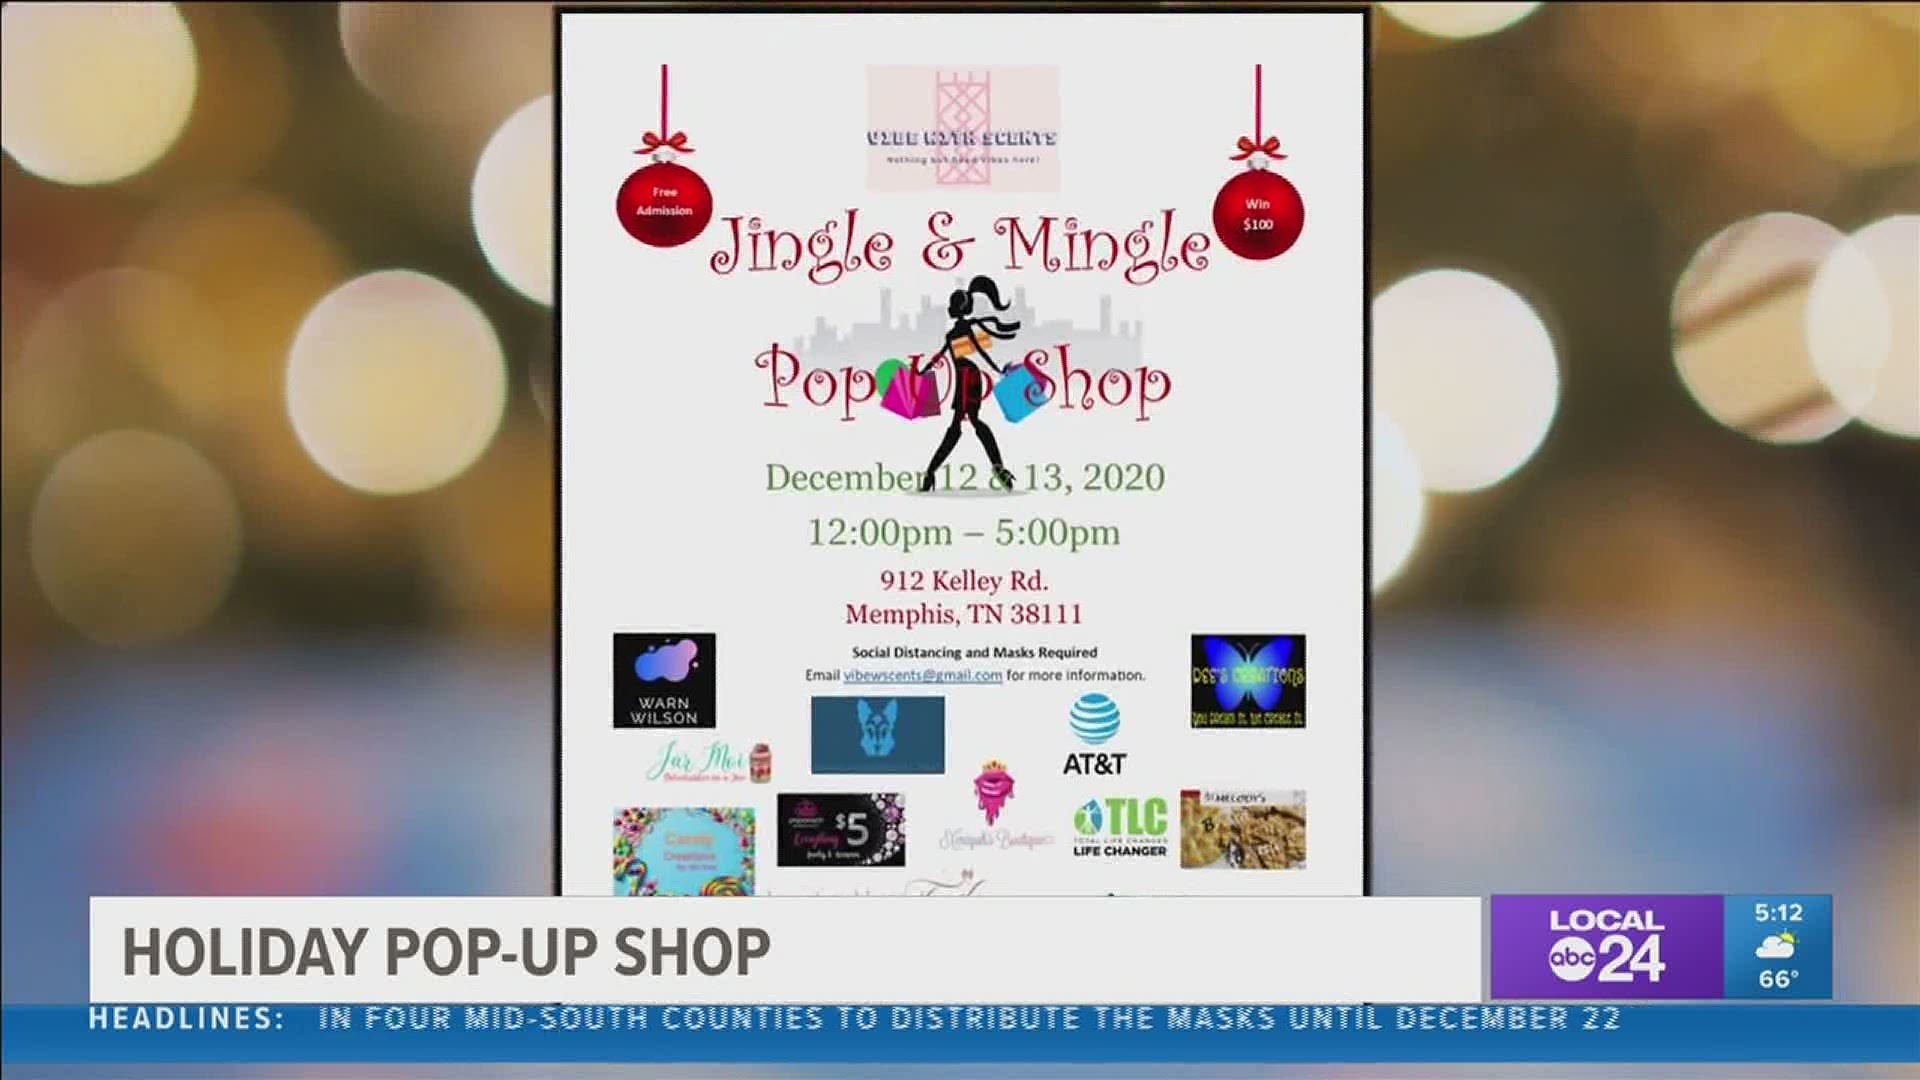 The Jingle & Mingle pop-up shop will bring 17 vendors together for holiday shopping.